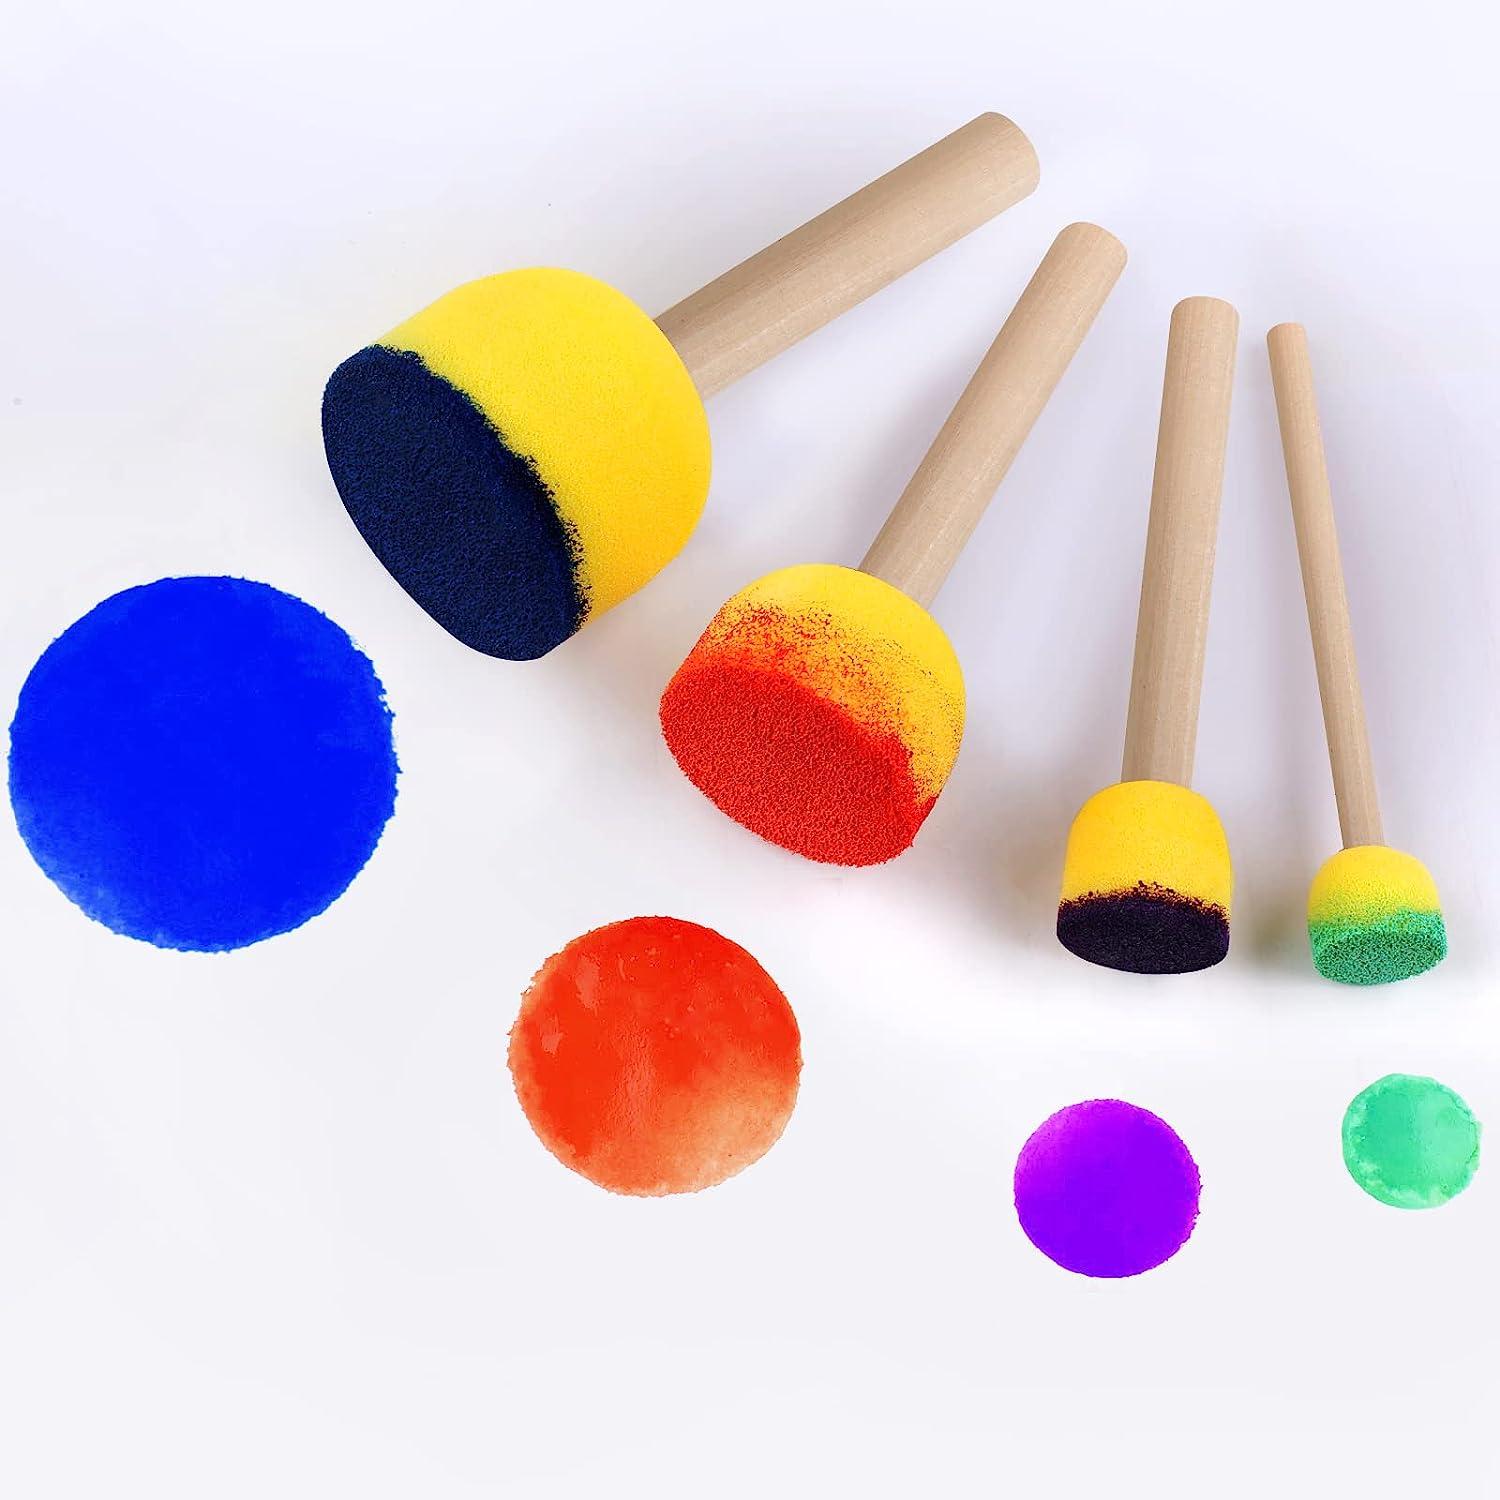 30 Pcs Round Sponges Brush Set Round Sponge Brushes for Painting Paint  Sponges for Acrylic Painting Painting Tools for Kids Arts and Crafts (4  Sizes)